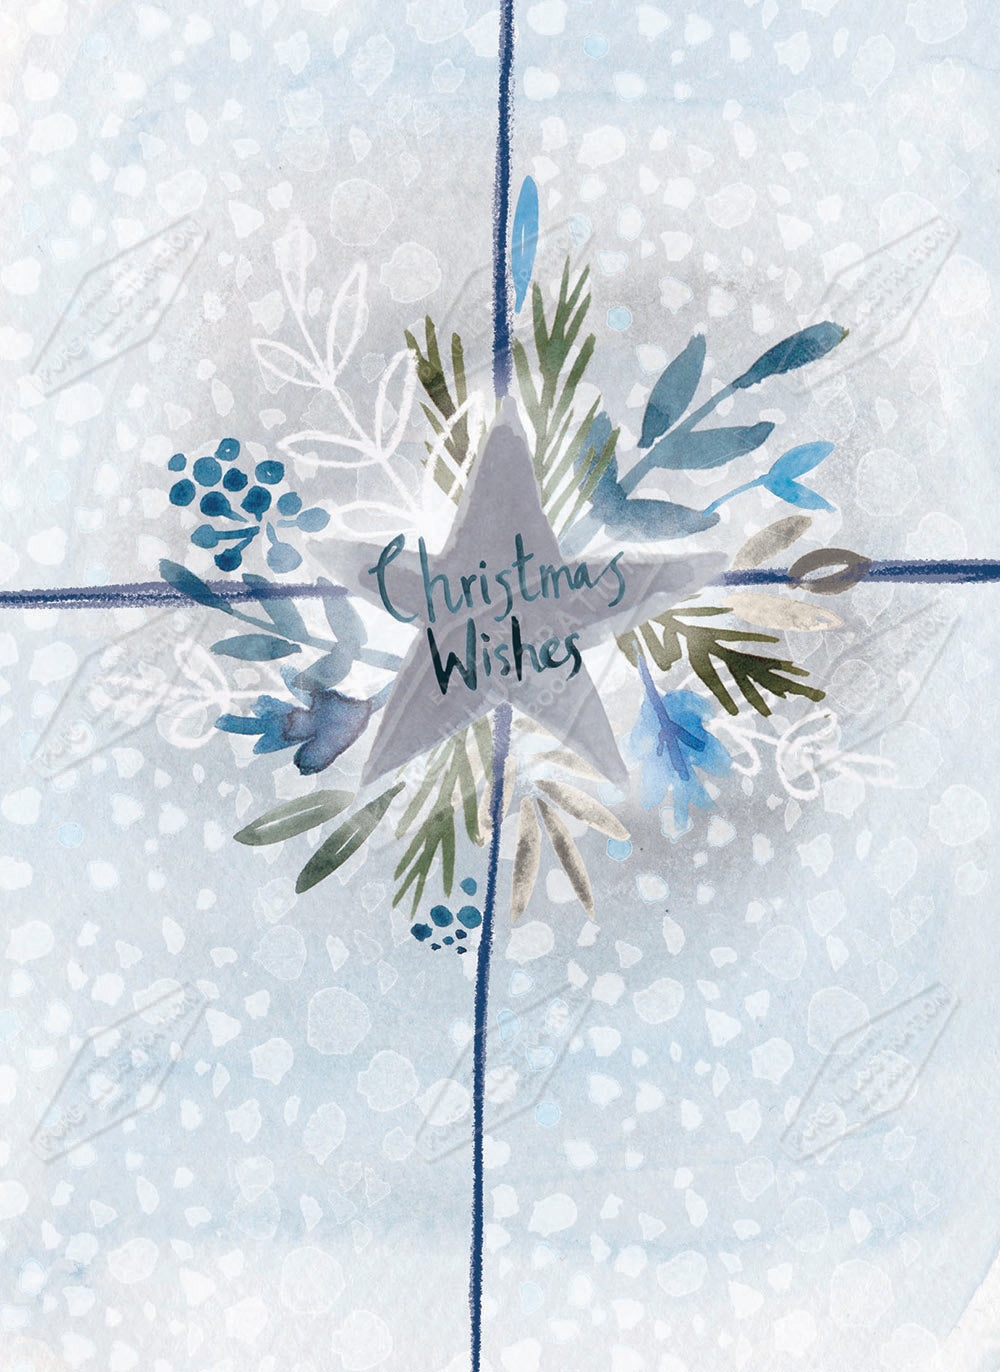 00034222SLA- Sarah Lake is represented by Pure Art Licensing Agency - Christmas Greeting Card Design